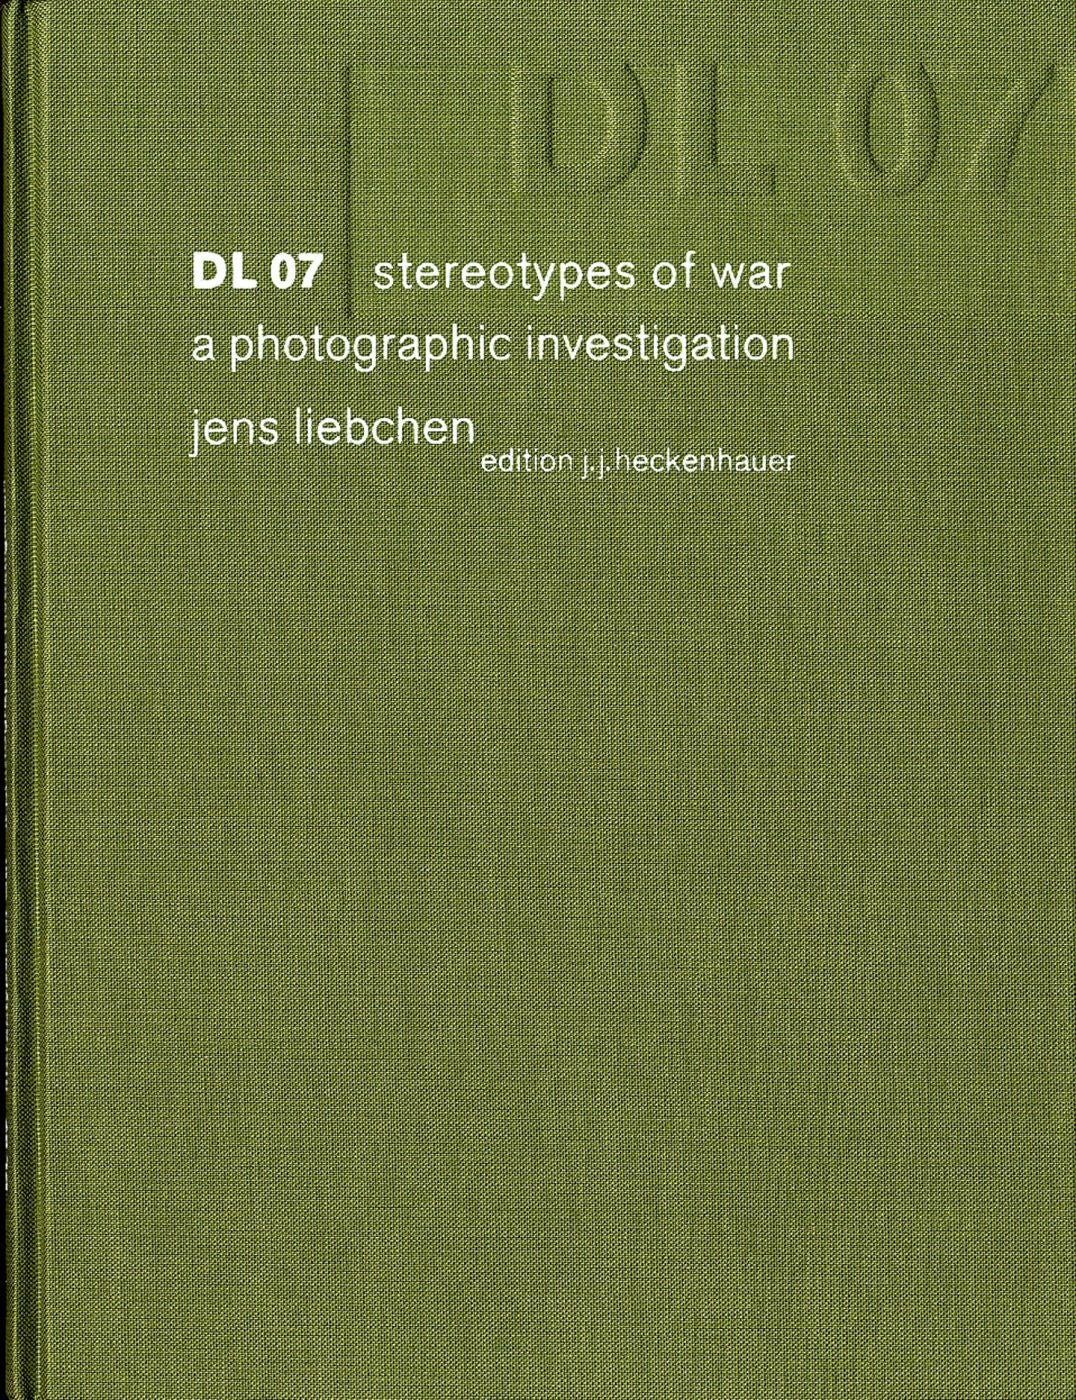 DL 07: Stereotypes of War, a Photographic Investigation, Limited Edition